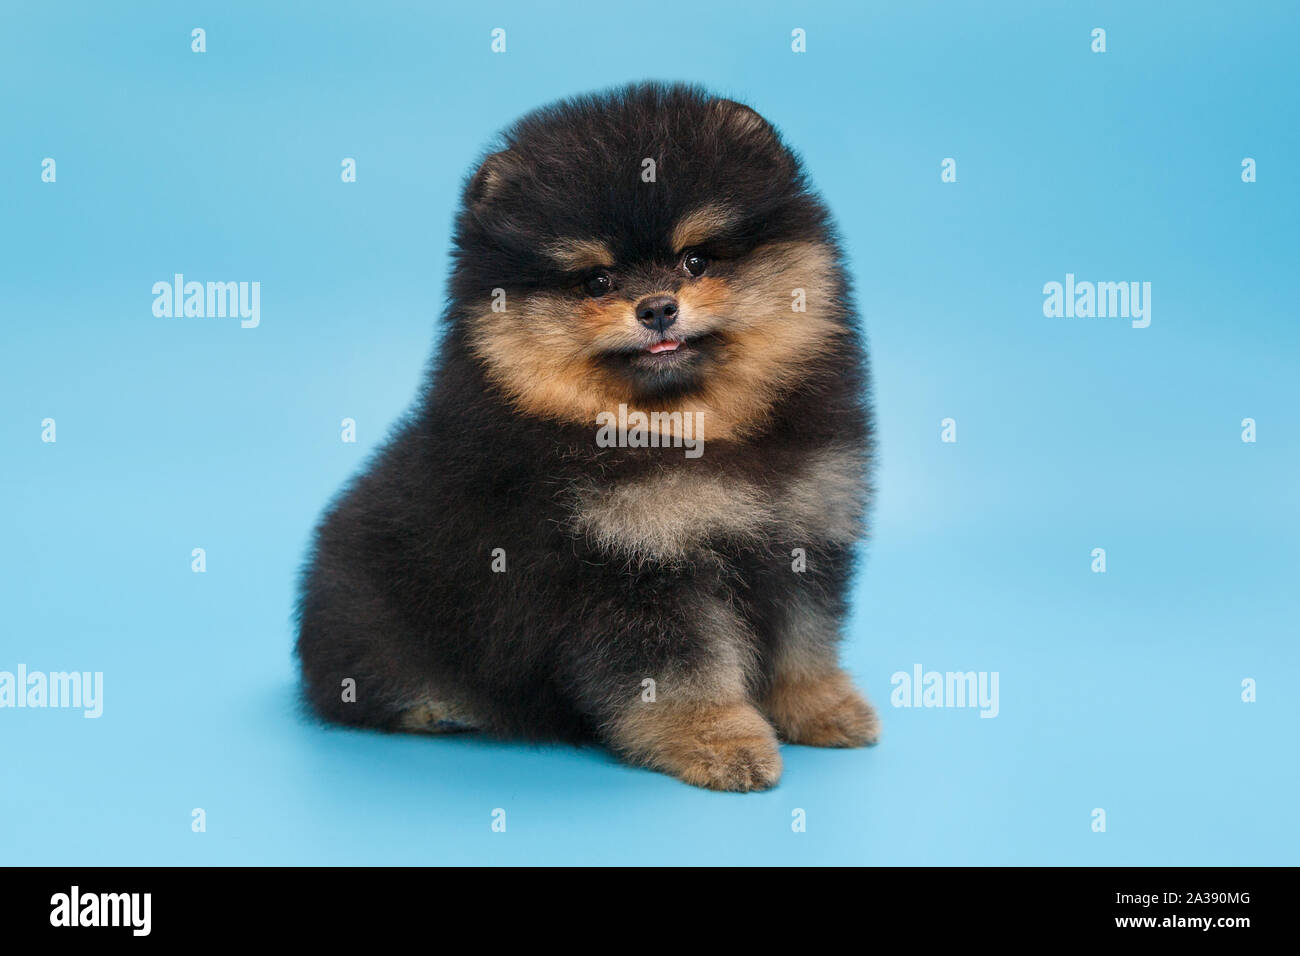 Page 2 - Pomeranian Puppies High Resolution Stock Photography and Images -  Alamy